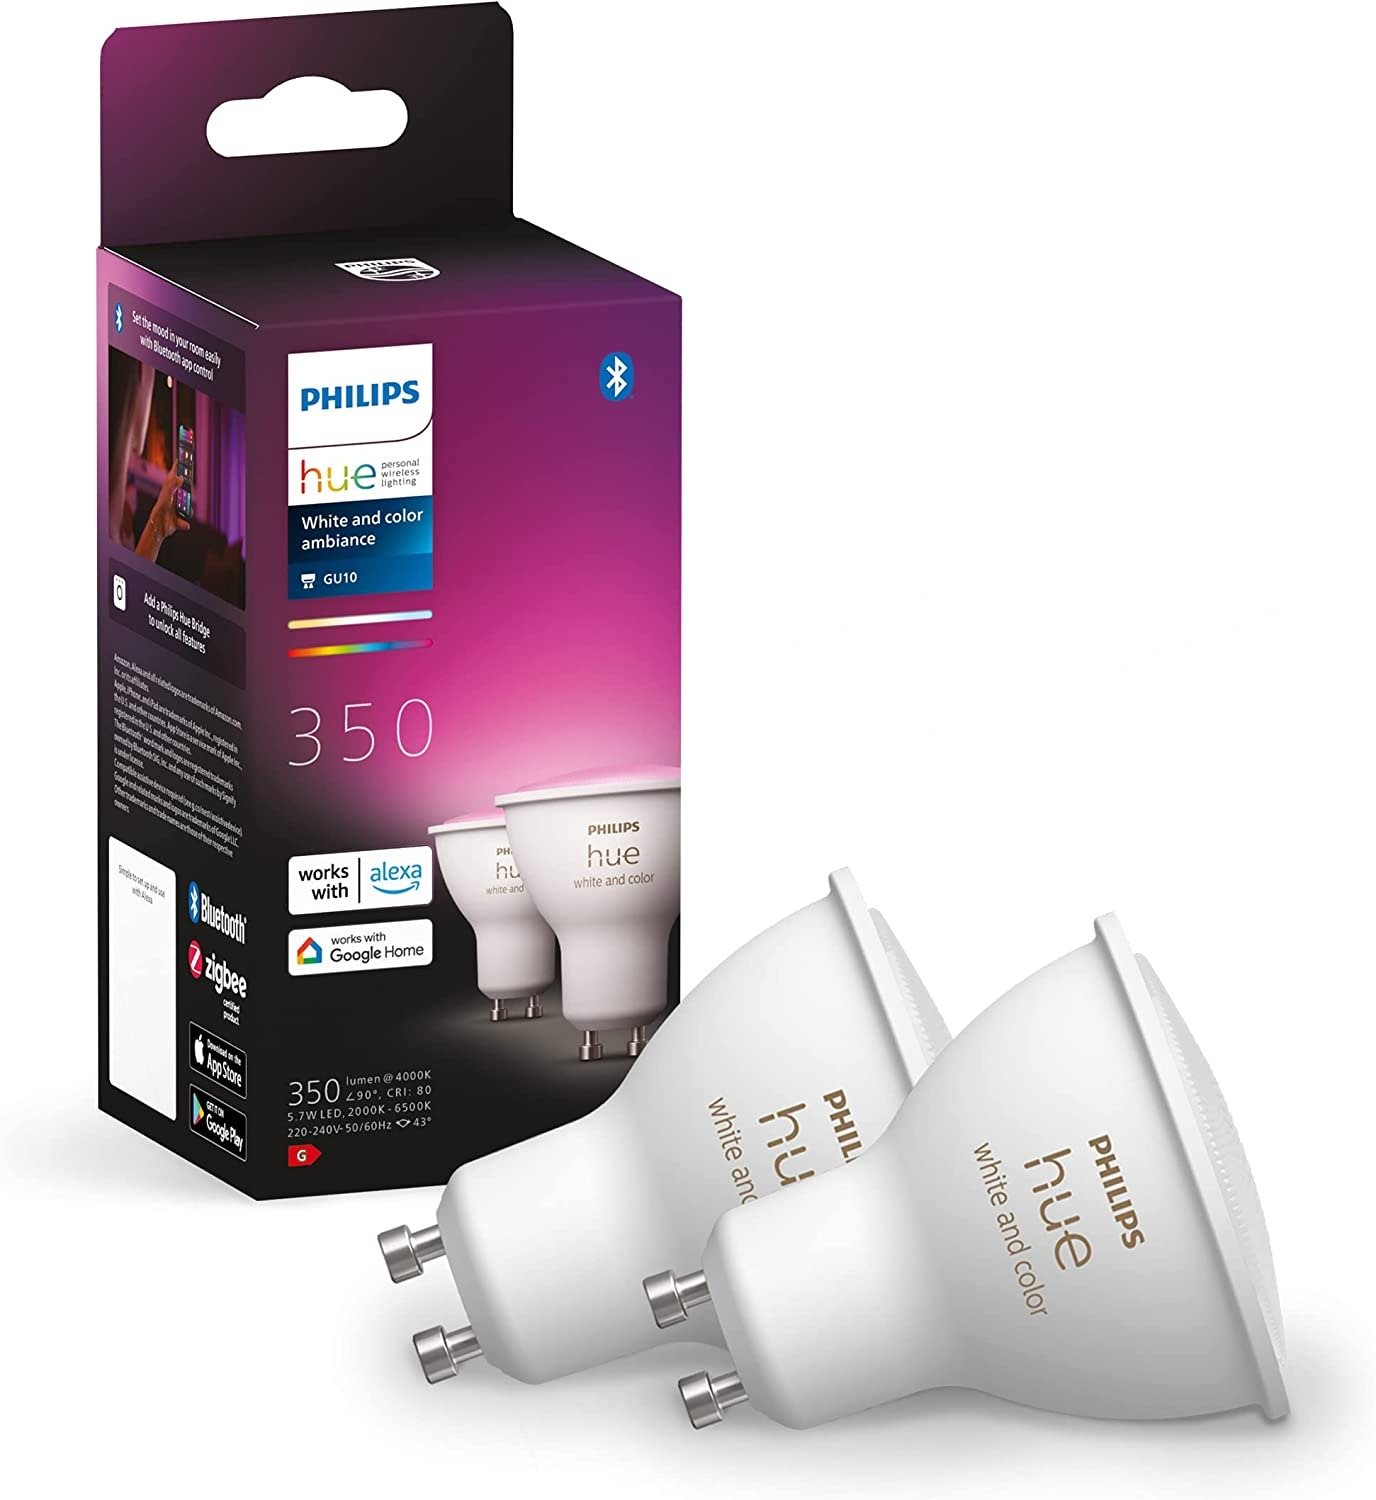 Philips Hue White and Color ambiance 5.7W GU10 szett, 2 db